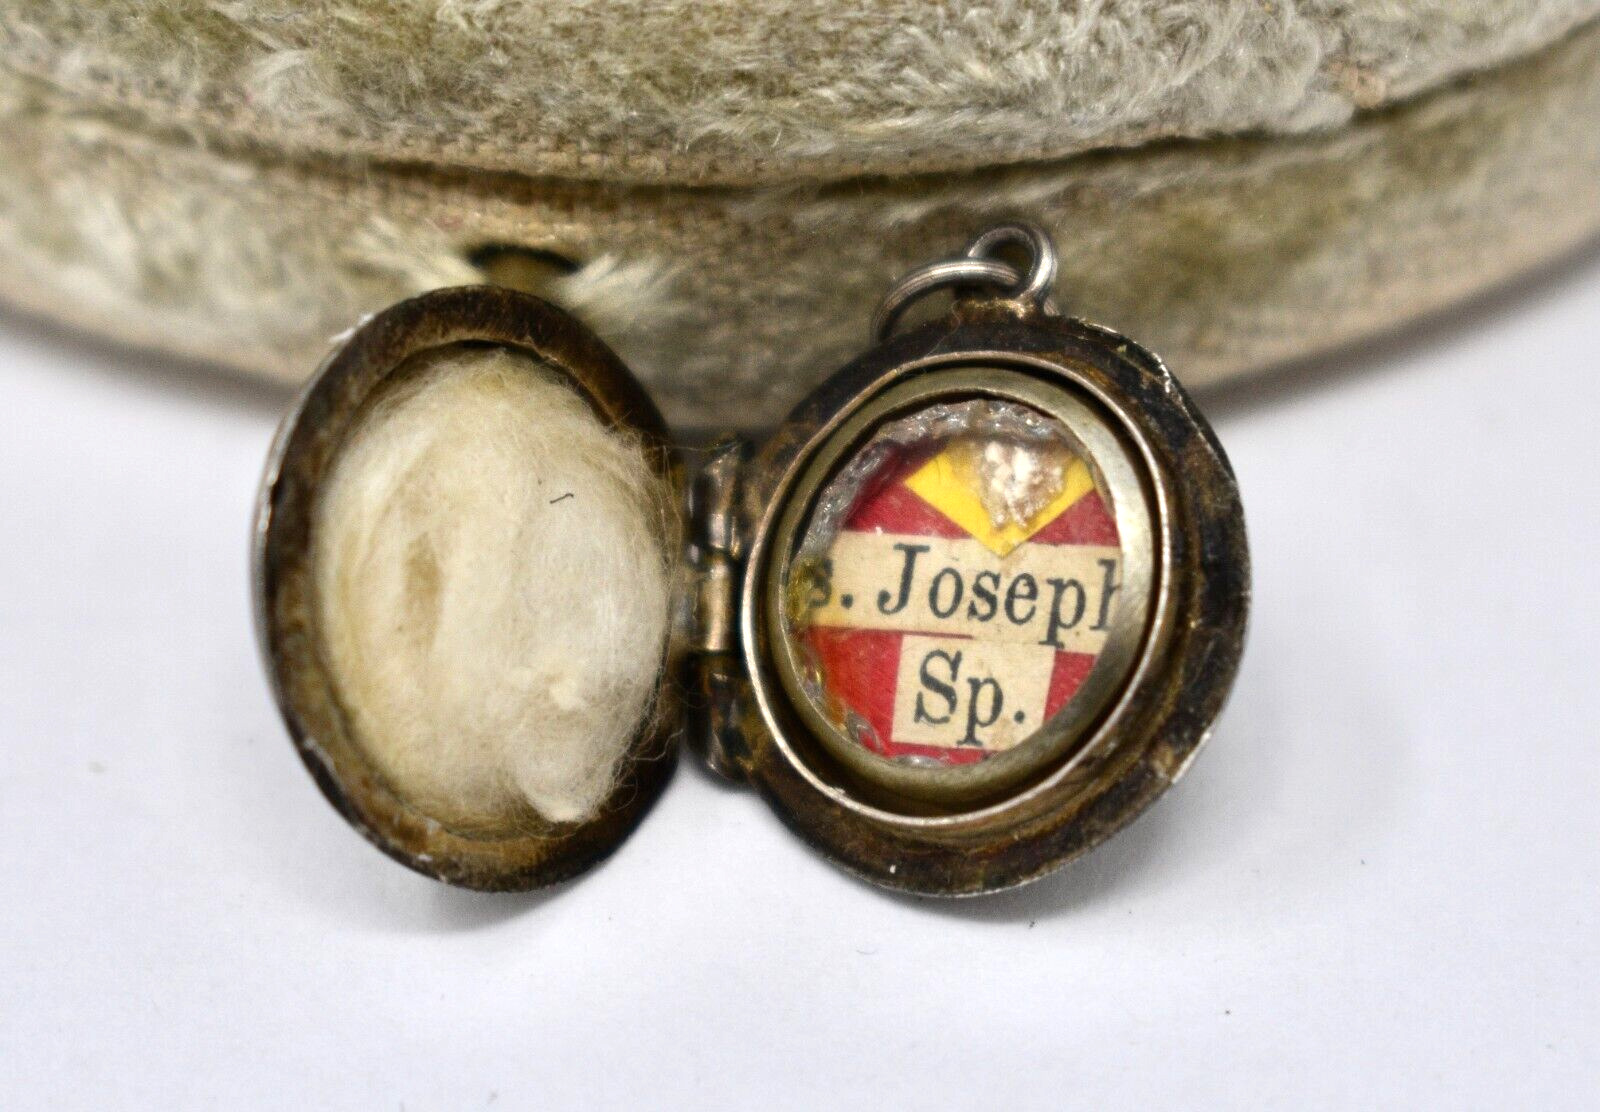 St. Joseph [Spouse of Mary] 19th C. Reliquary Silver Locket Wax Sealed